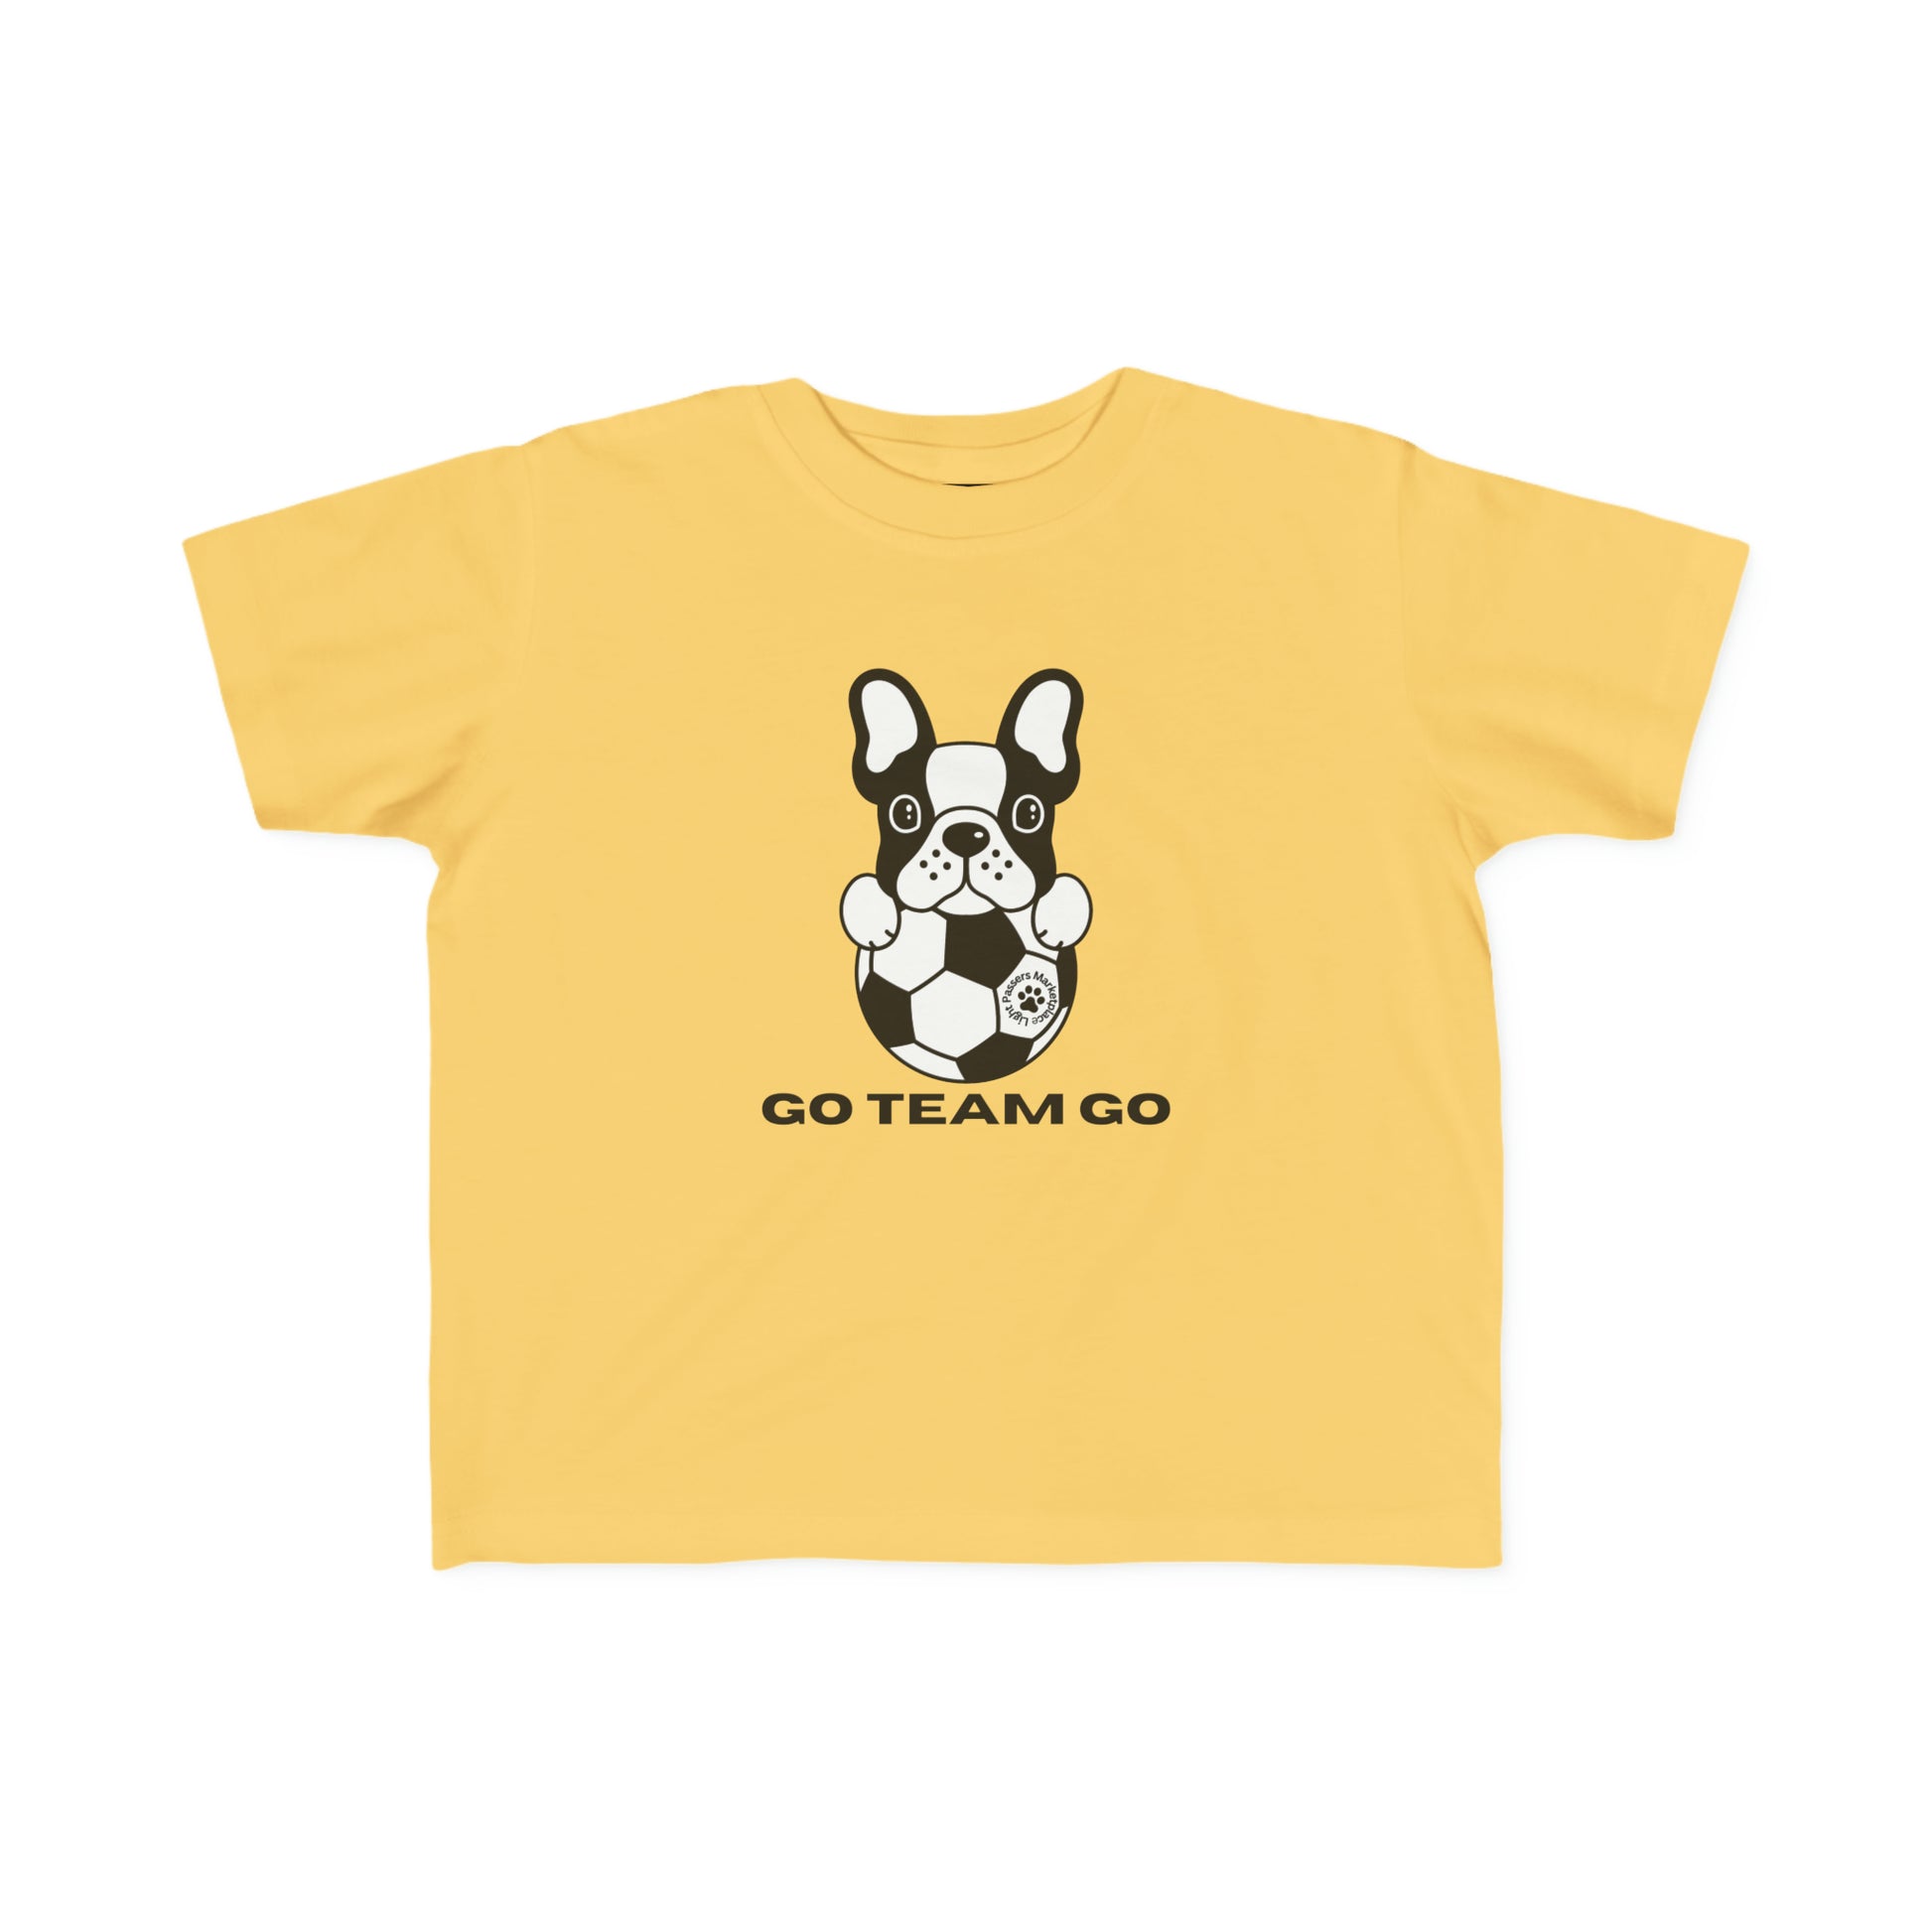 A yellow toddler t-shirt featuring a dog playing soccer, ideal for sensitive skin. Made of 100% combed, ring-spun cotton with a durable print. Classic fit, tear-away label, and lightweight fabric.